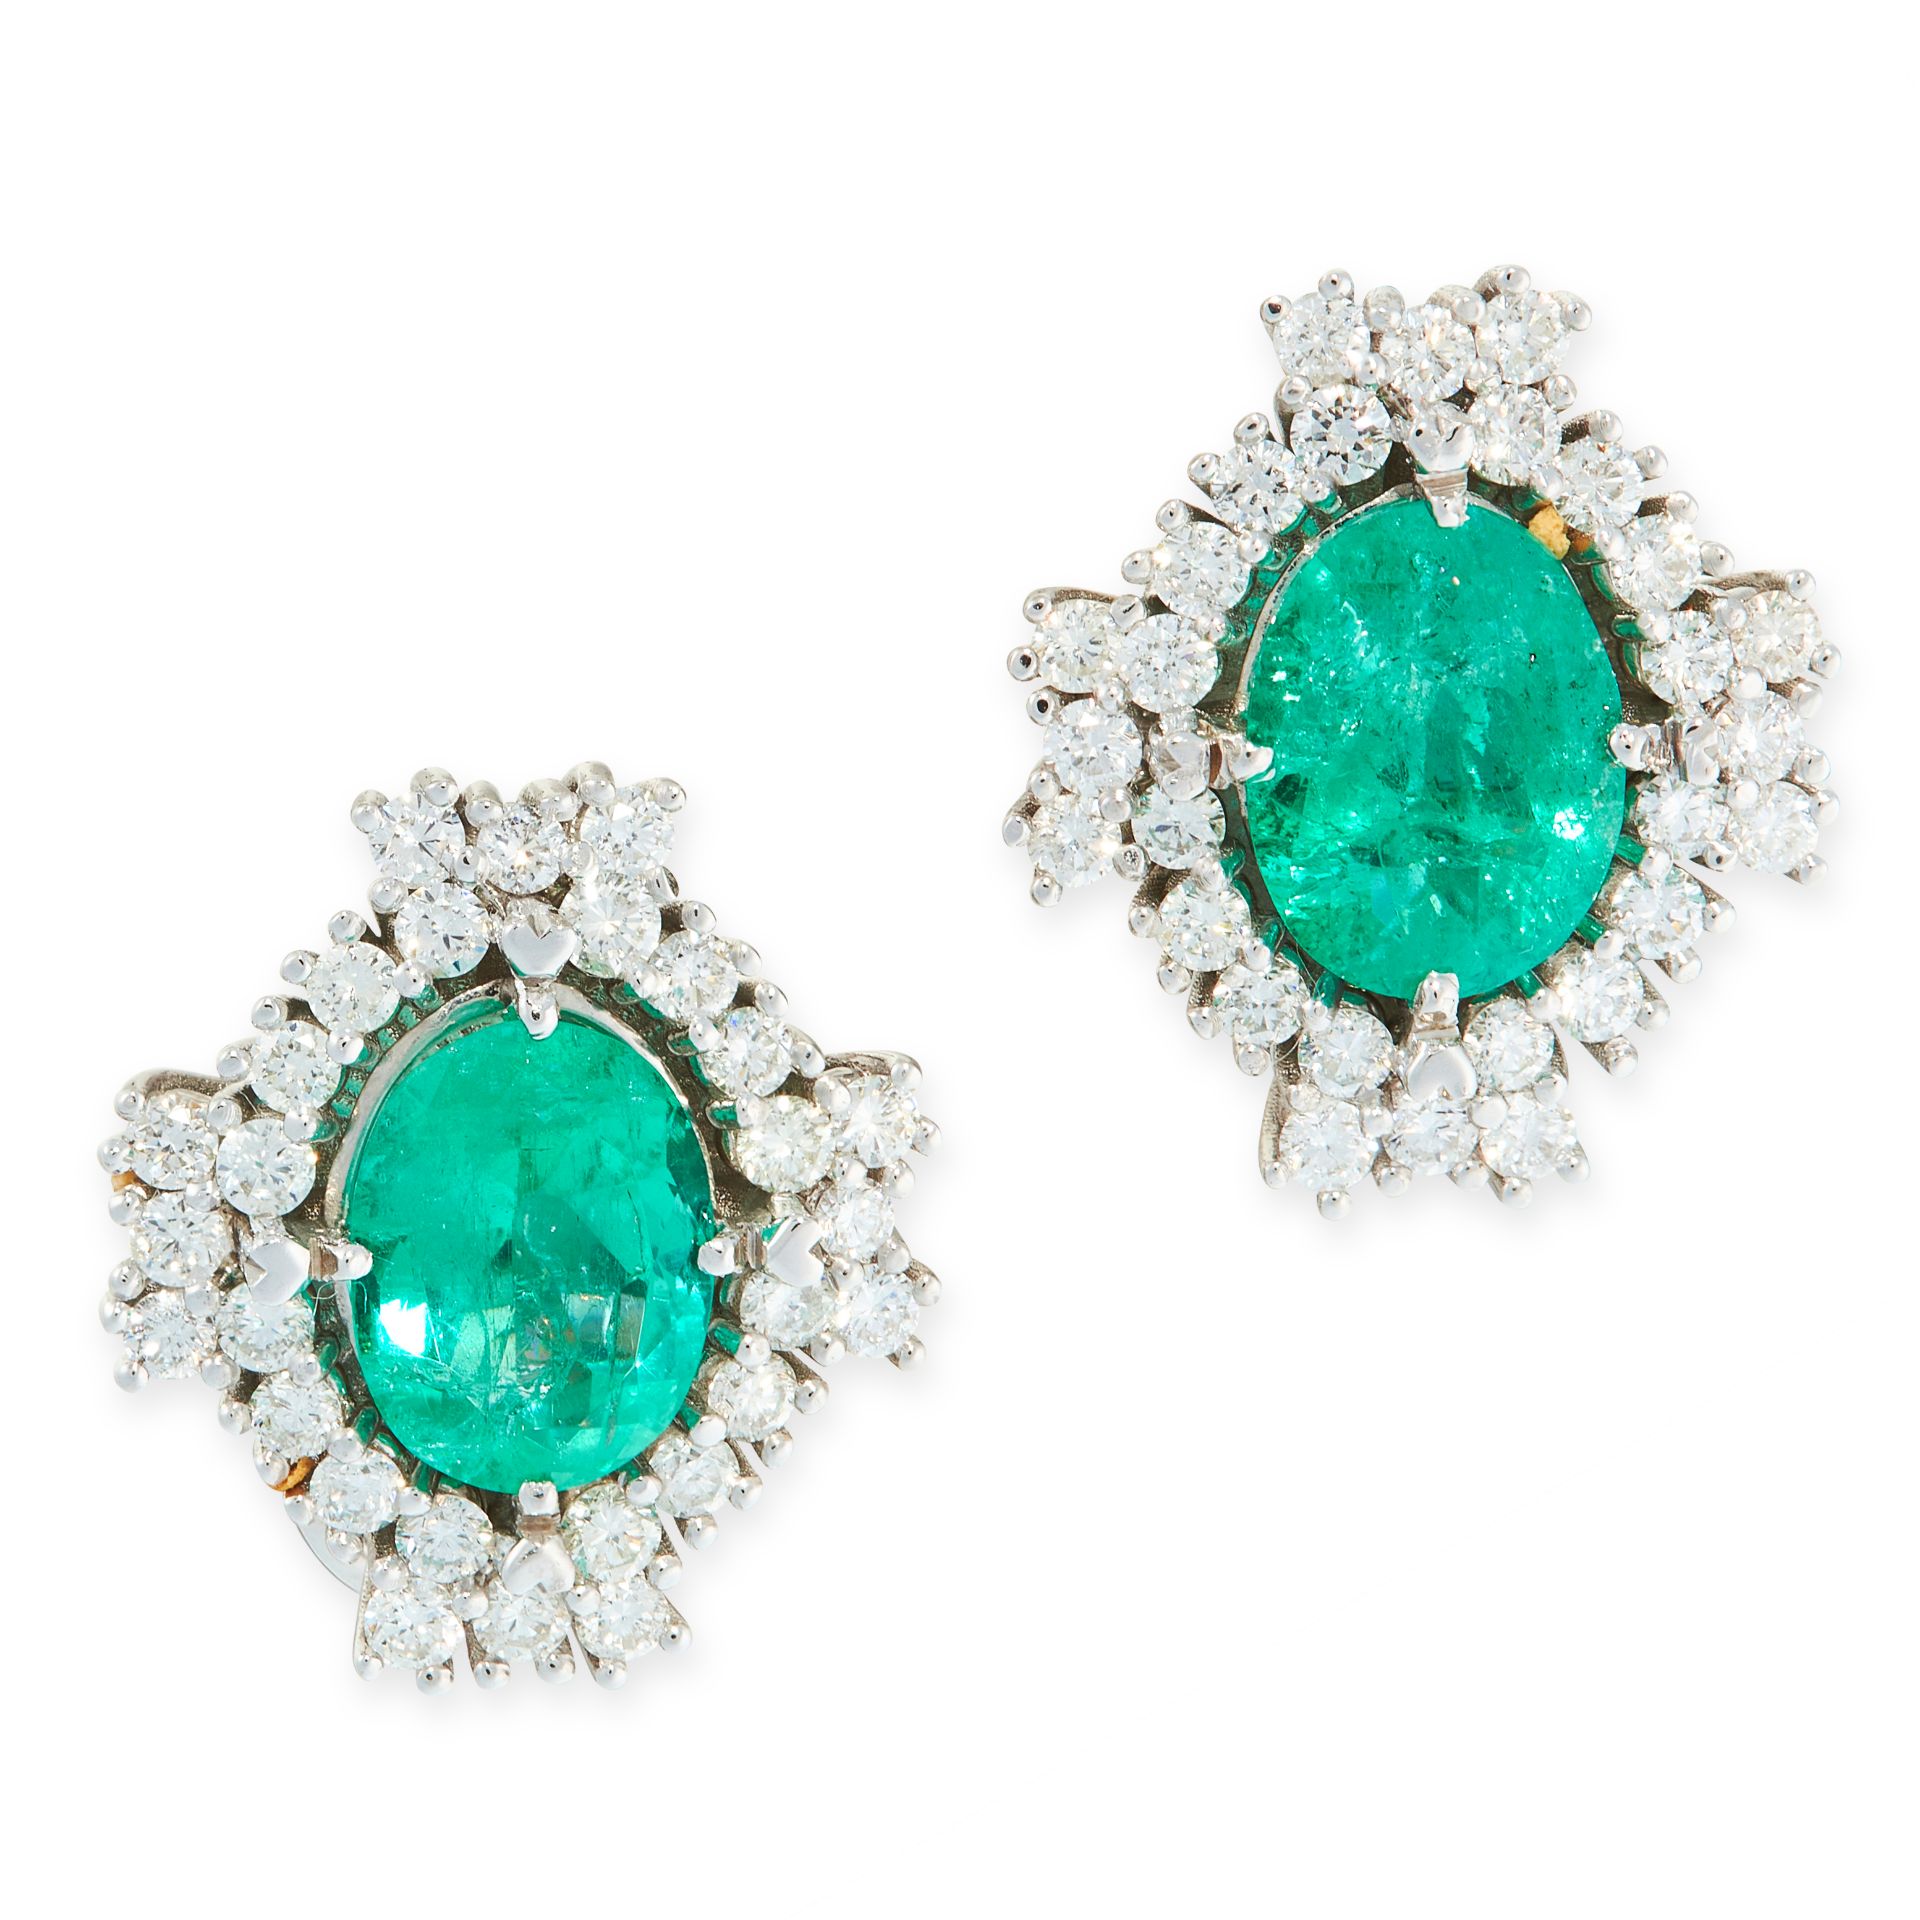 A PAIR OF COLOMBIAN EMERALD AND DIAMOND EARRINGS each set with an oval cut emerald of 2.39 and 2.